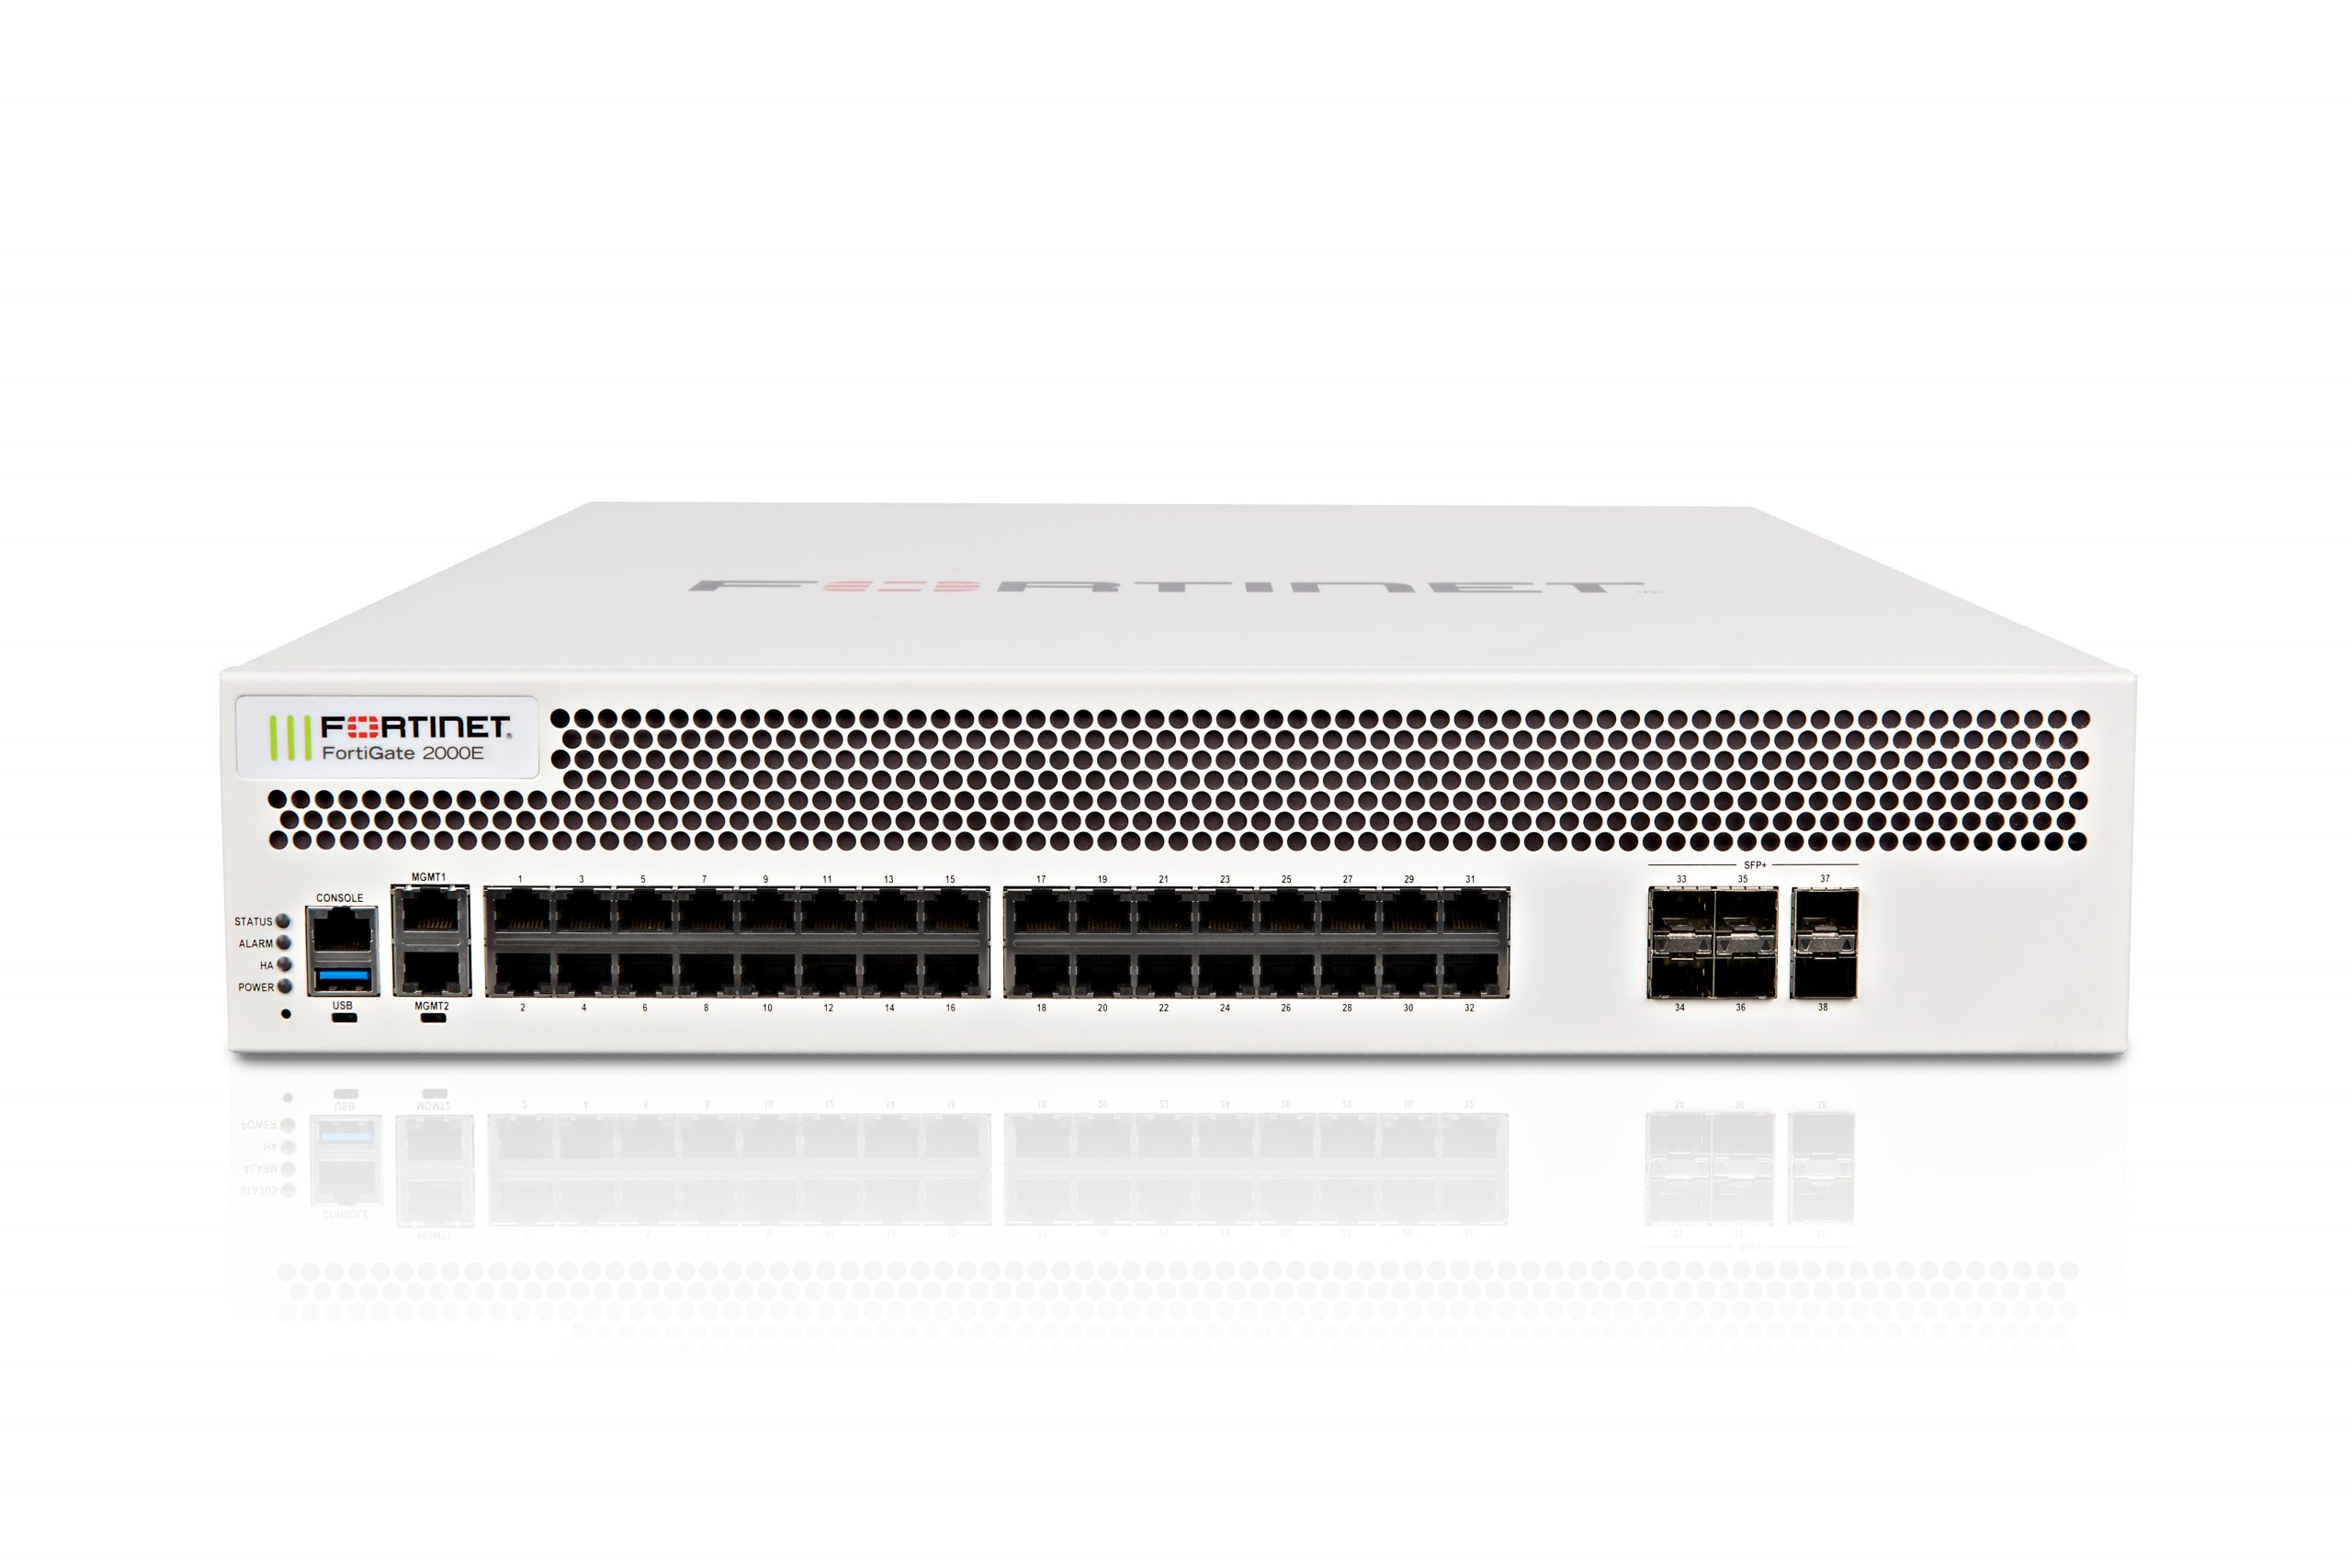 Fortinet   FortiGate 2000E / FG-2000E Next Generation Firewall (NGFW) Security Appliance